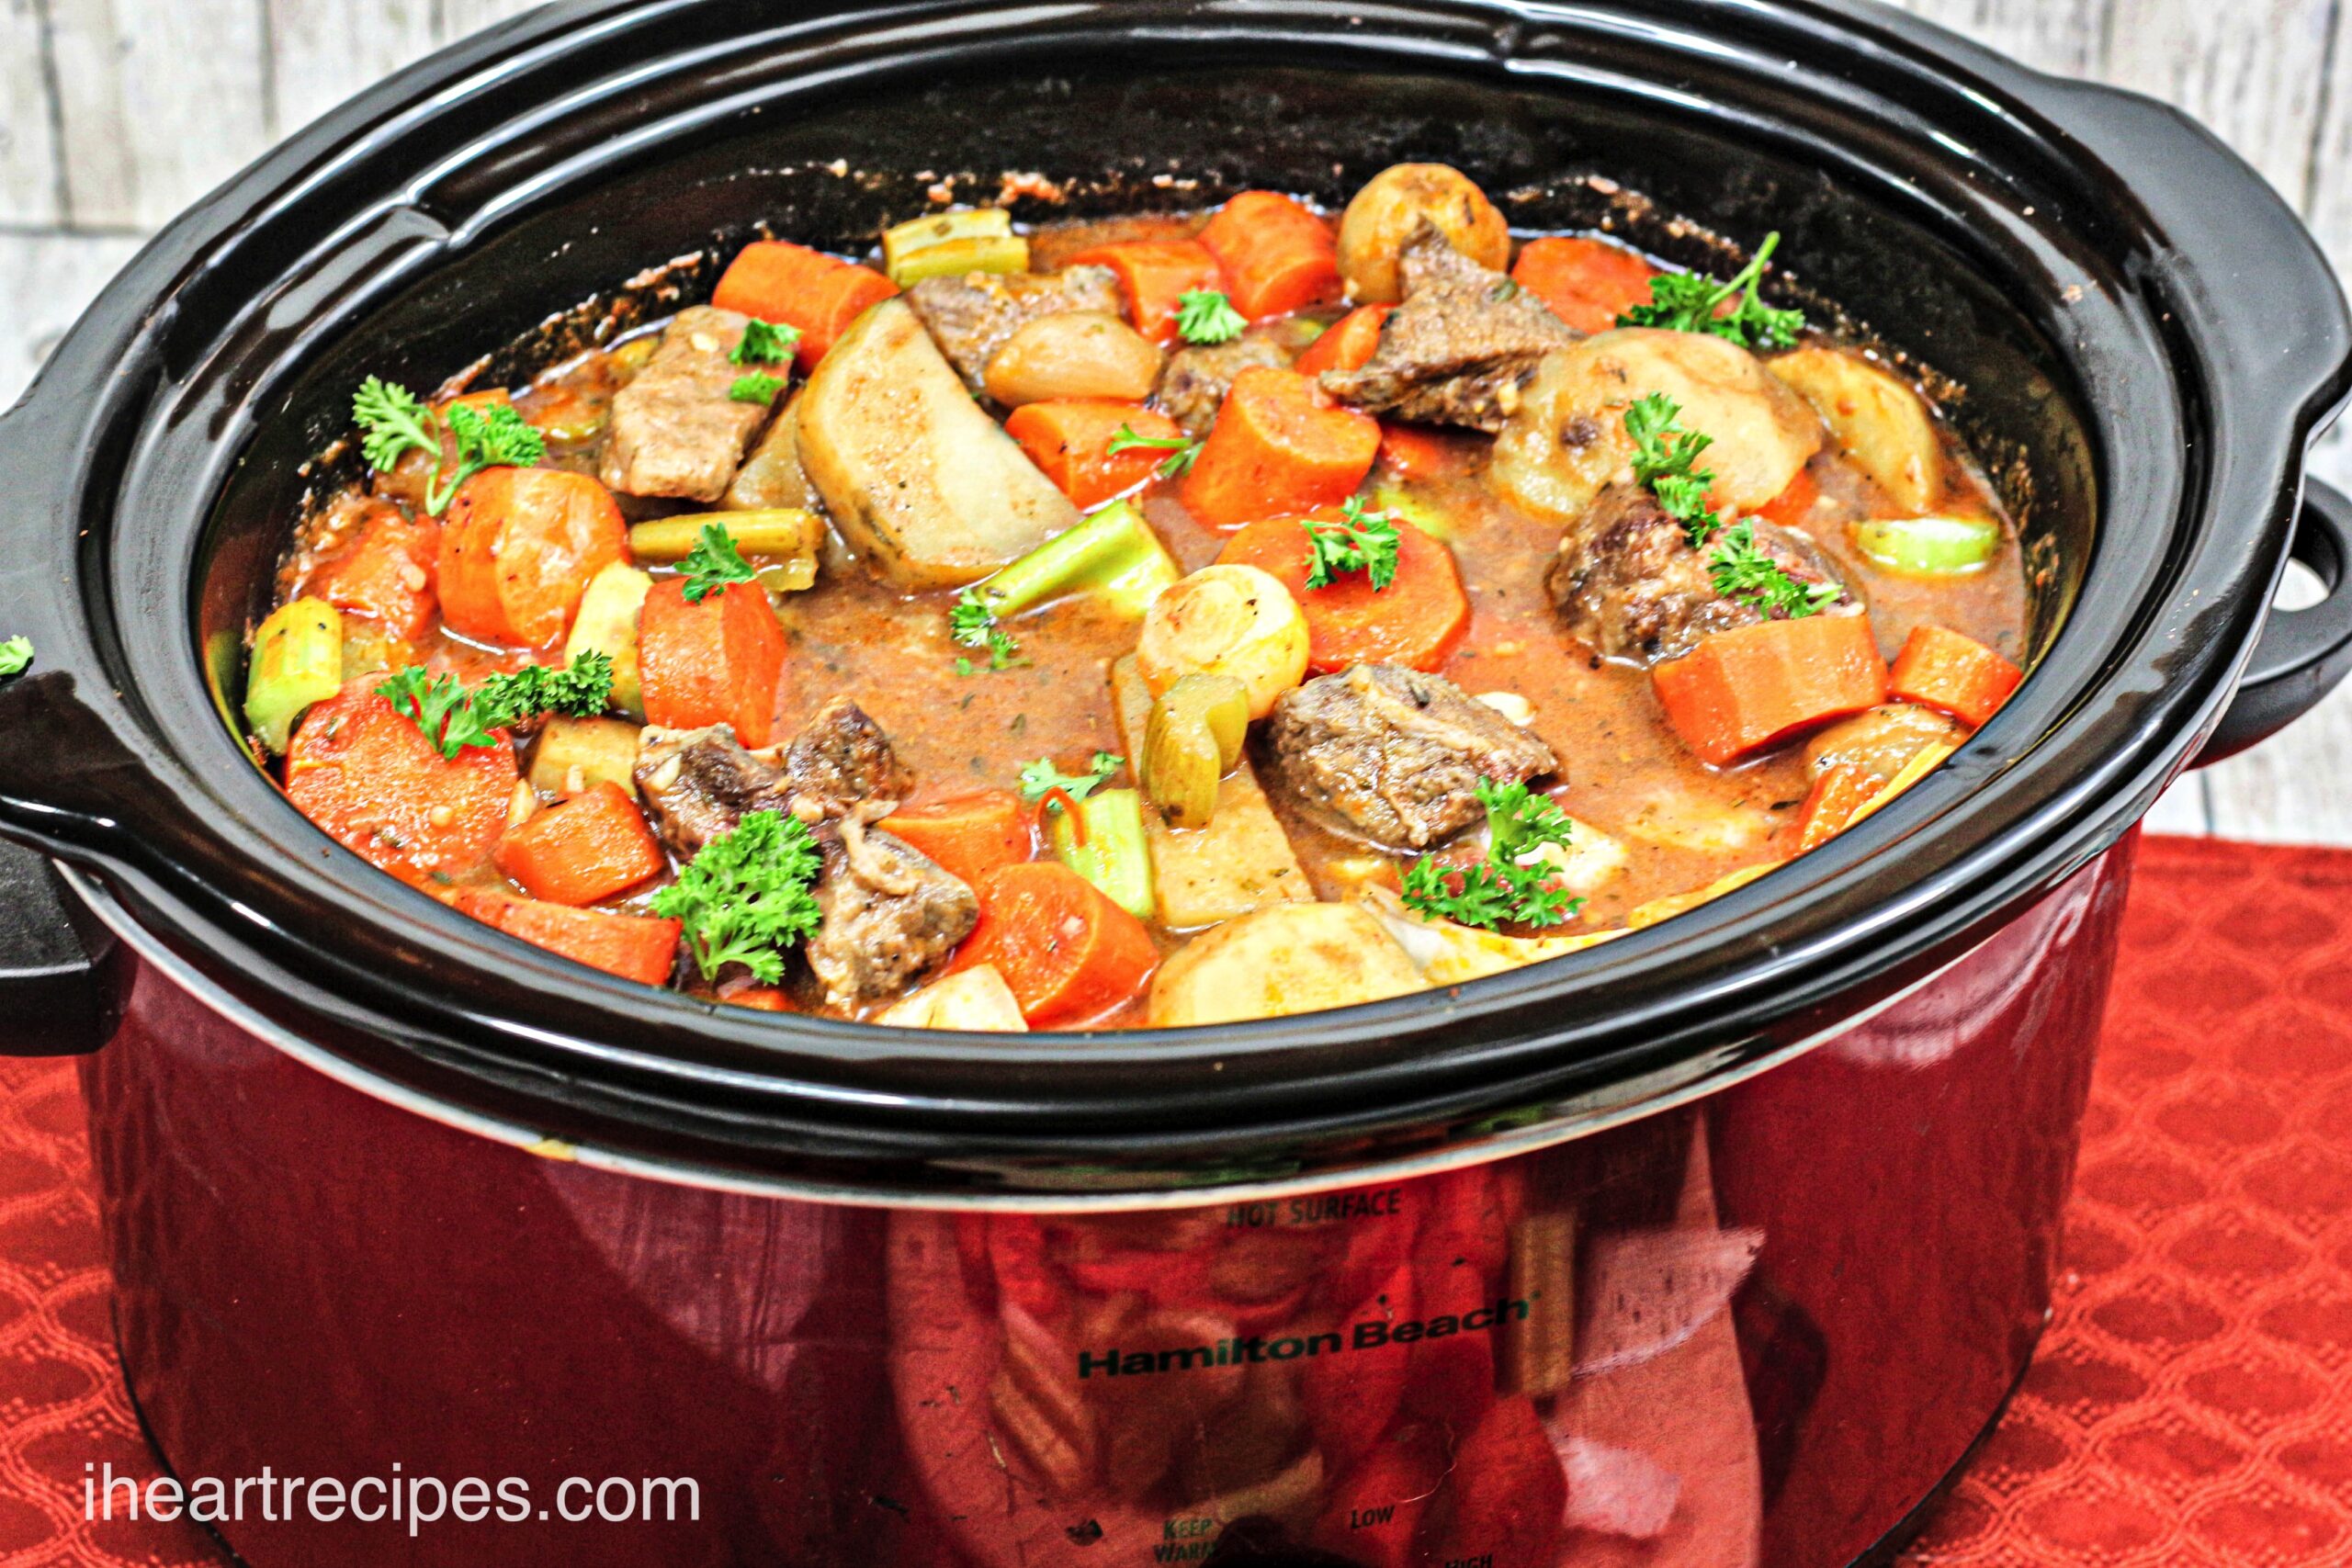 Easy Crock Pot Recipes To Make In The Slow Cooker - A Southern Soul